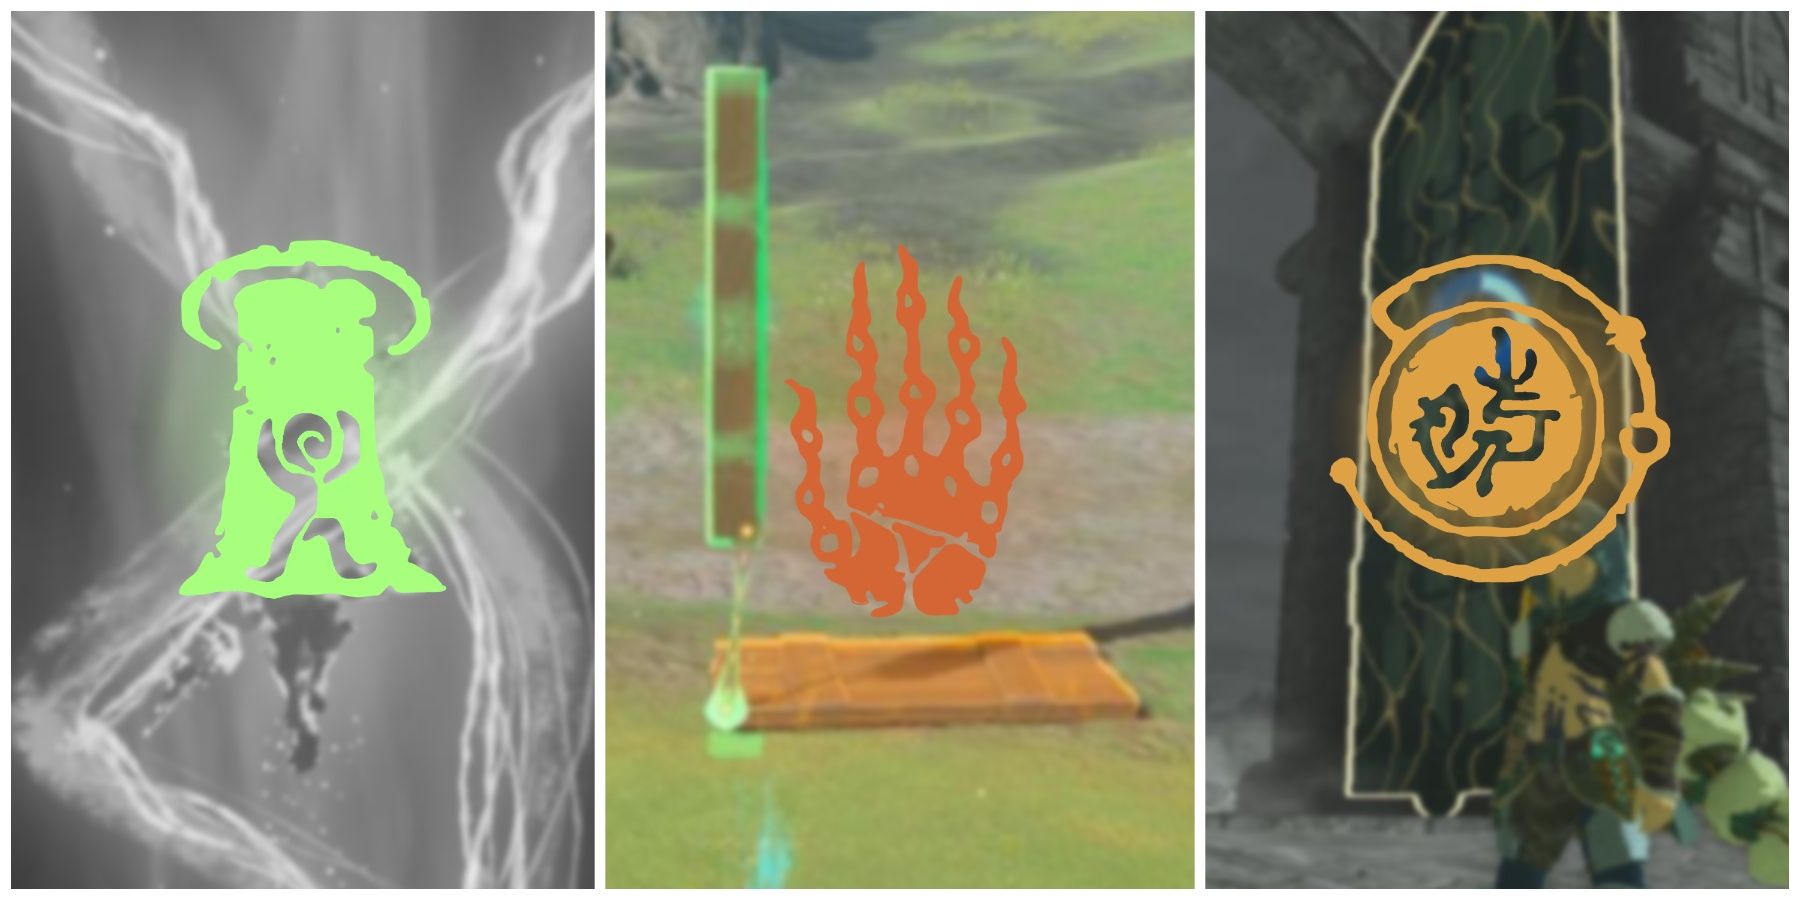 Featured image of Link's Abilities Ranked by Utility including Ascend, Ultrahand, Recall